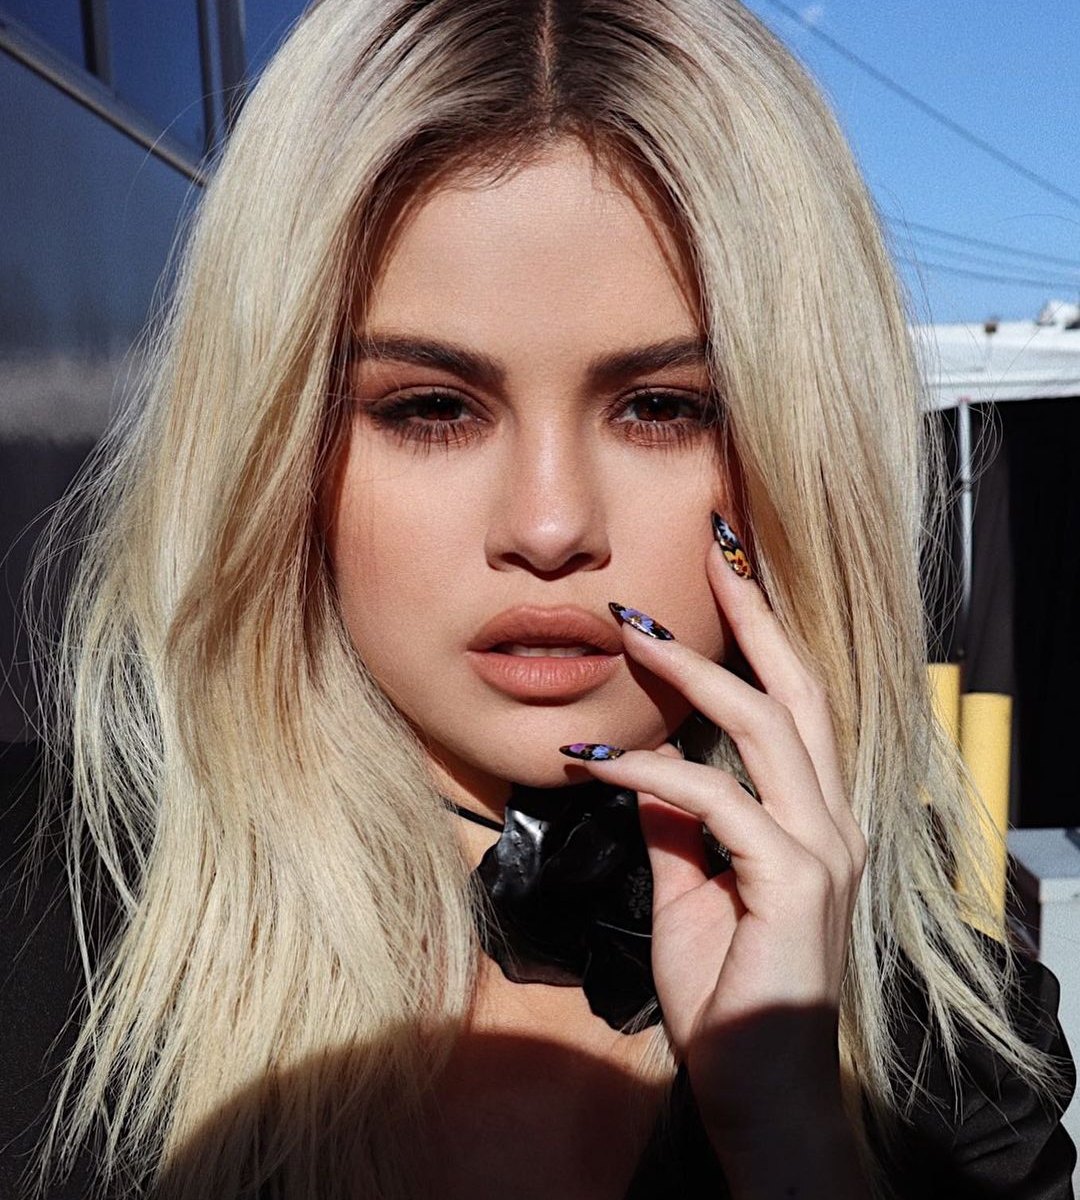 Selena Gomez's Blonde Hair: Photos of the Singer's Dramatic Look